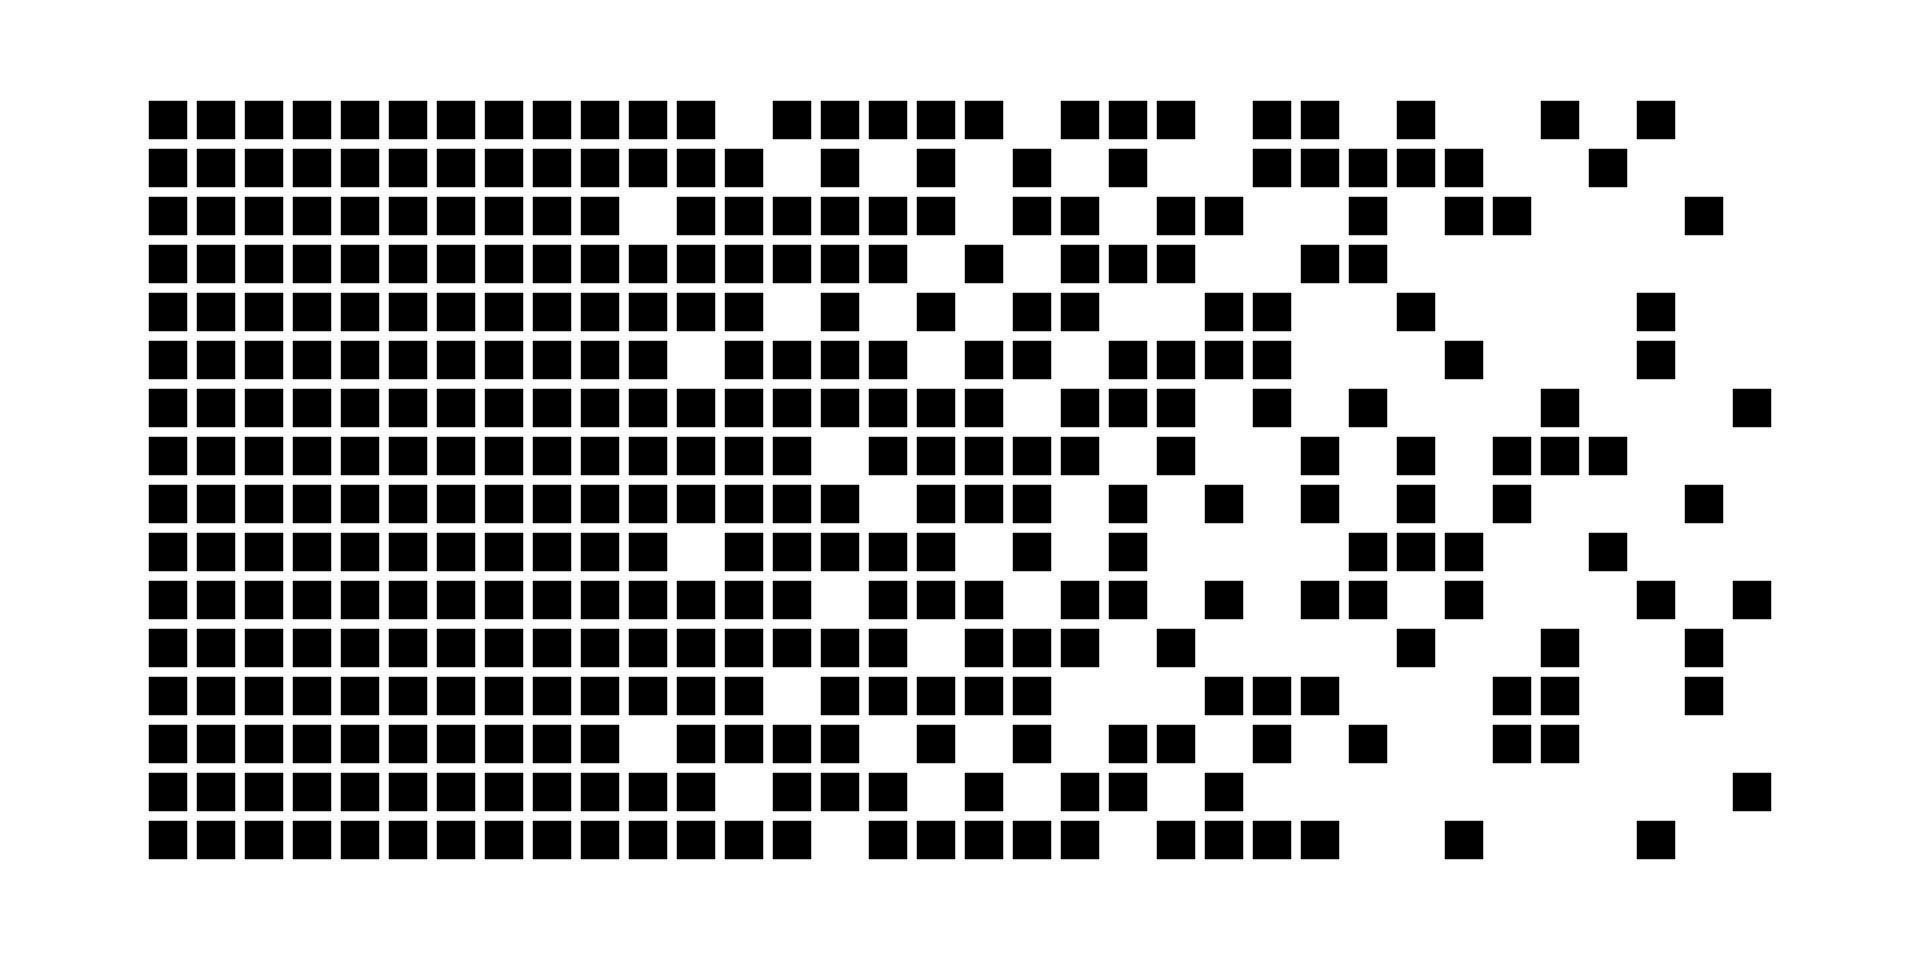 Pixel disintegration background. Halftone fragment. Dispersed dotted pattern. Concept of disintegration. Square pixel mosaic textures with square particles. Vector illustration on white background